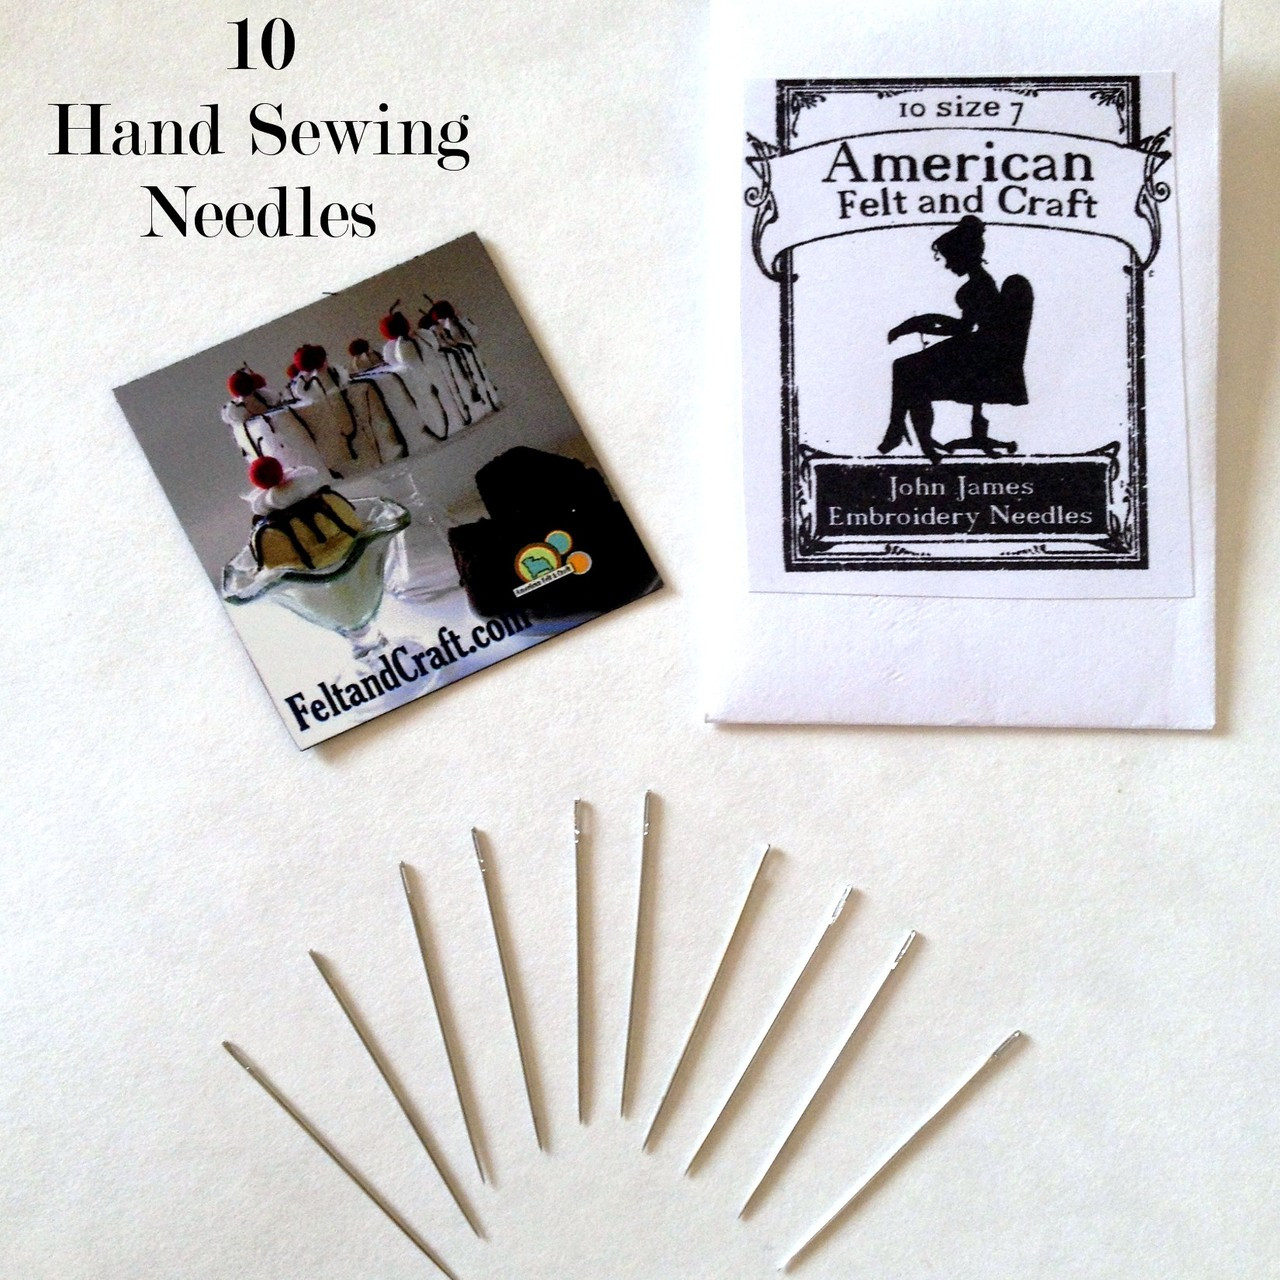  John James Embroidery Needles Size 10 : Arts, Crafts & Sewing